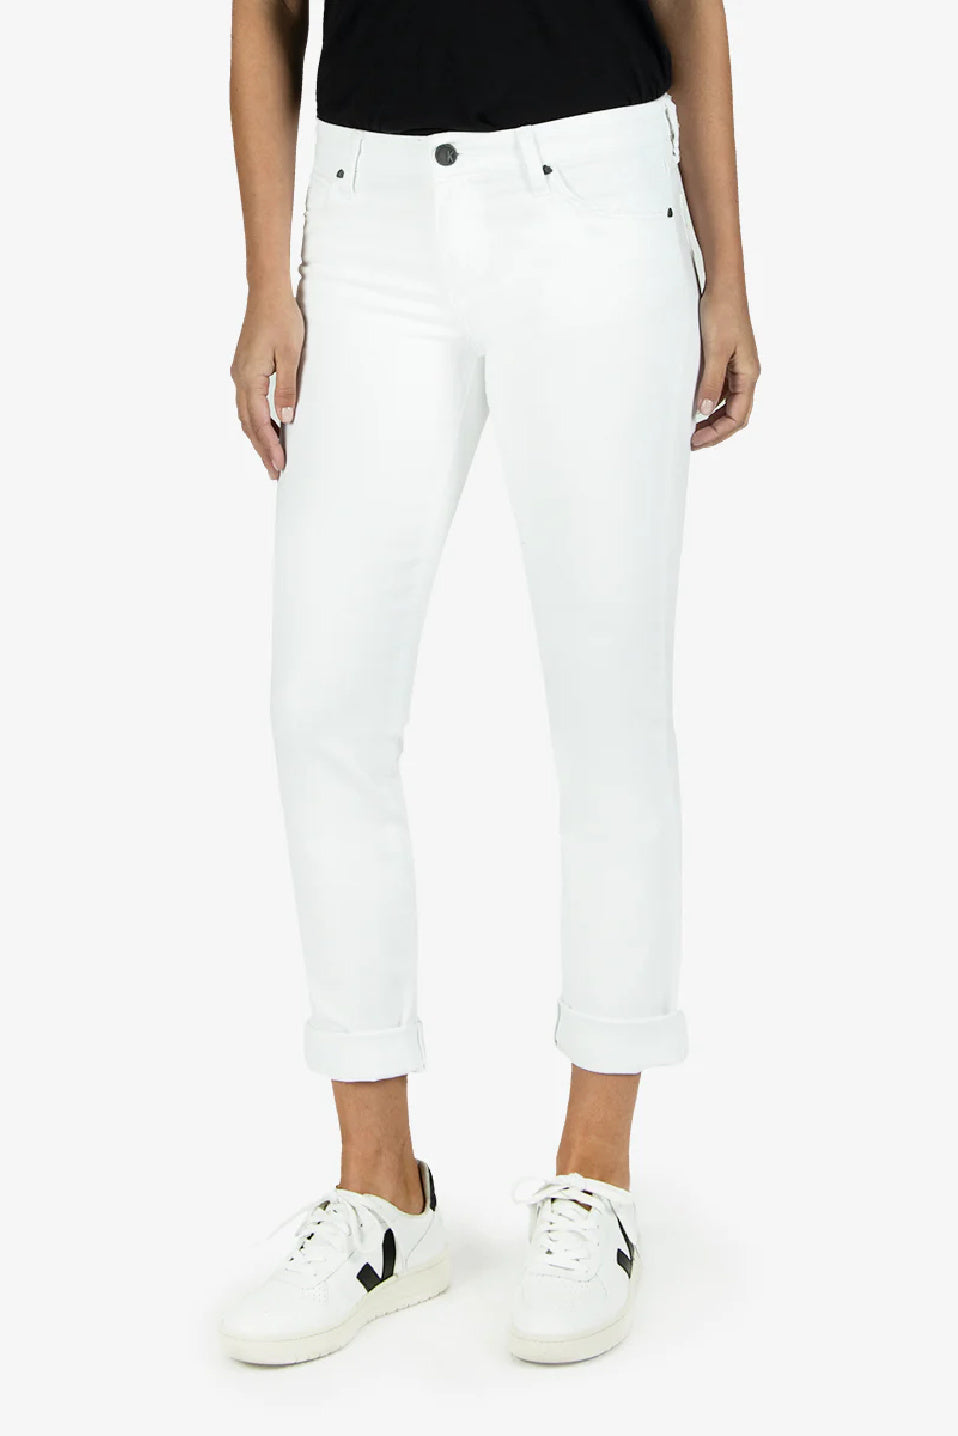 Kut From The Kloth Catherine Mid Rise Boyfriend Jeans (White)